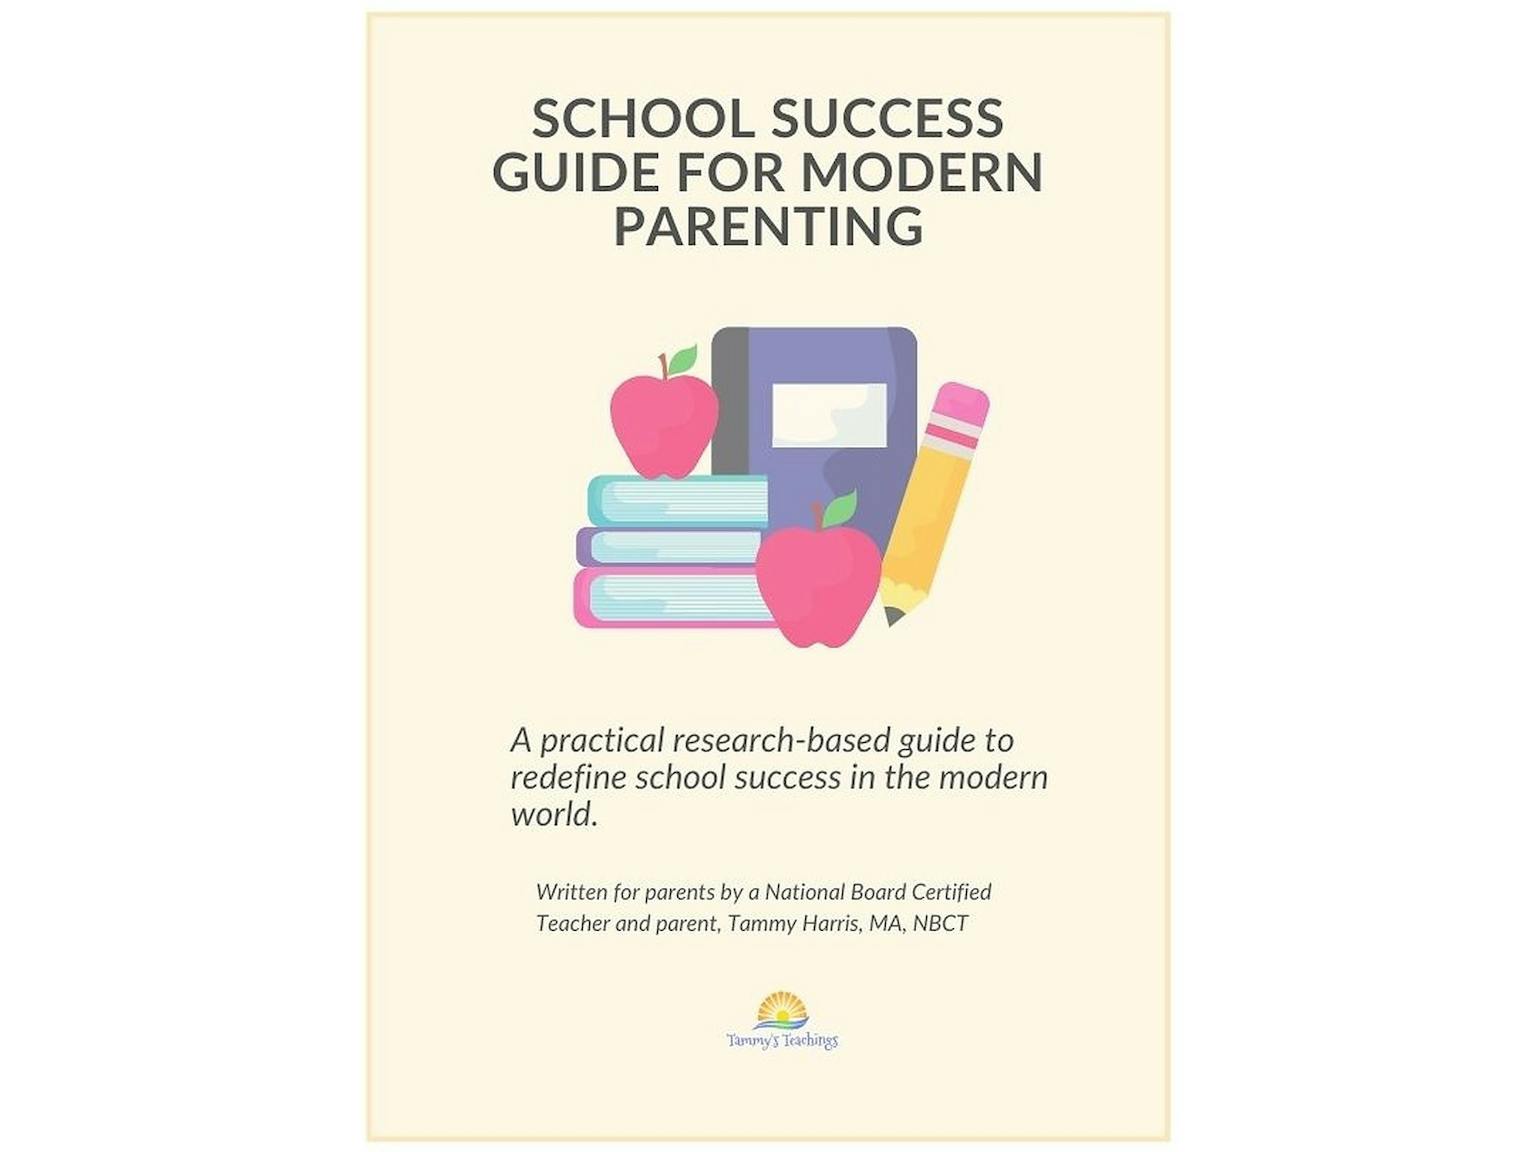 Bonus 2: A Practical Research-based Guide to Redefine School Success